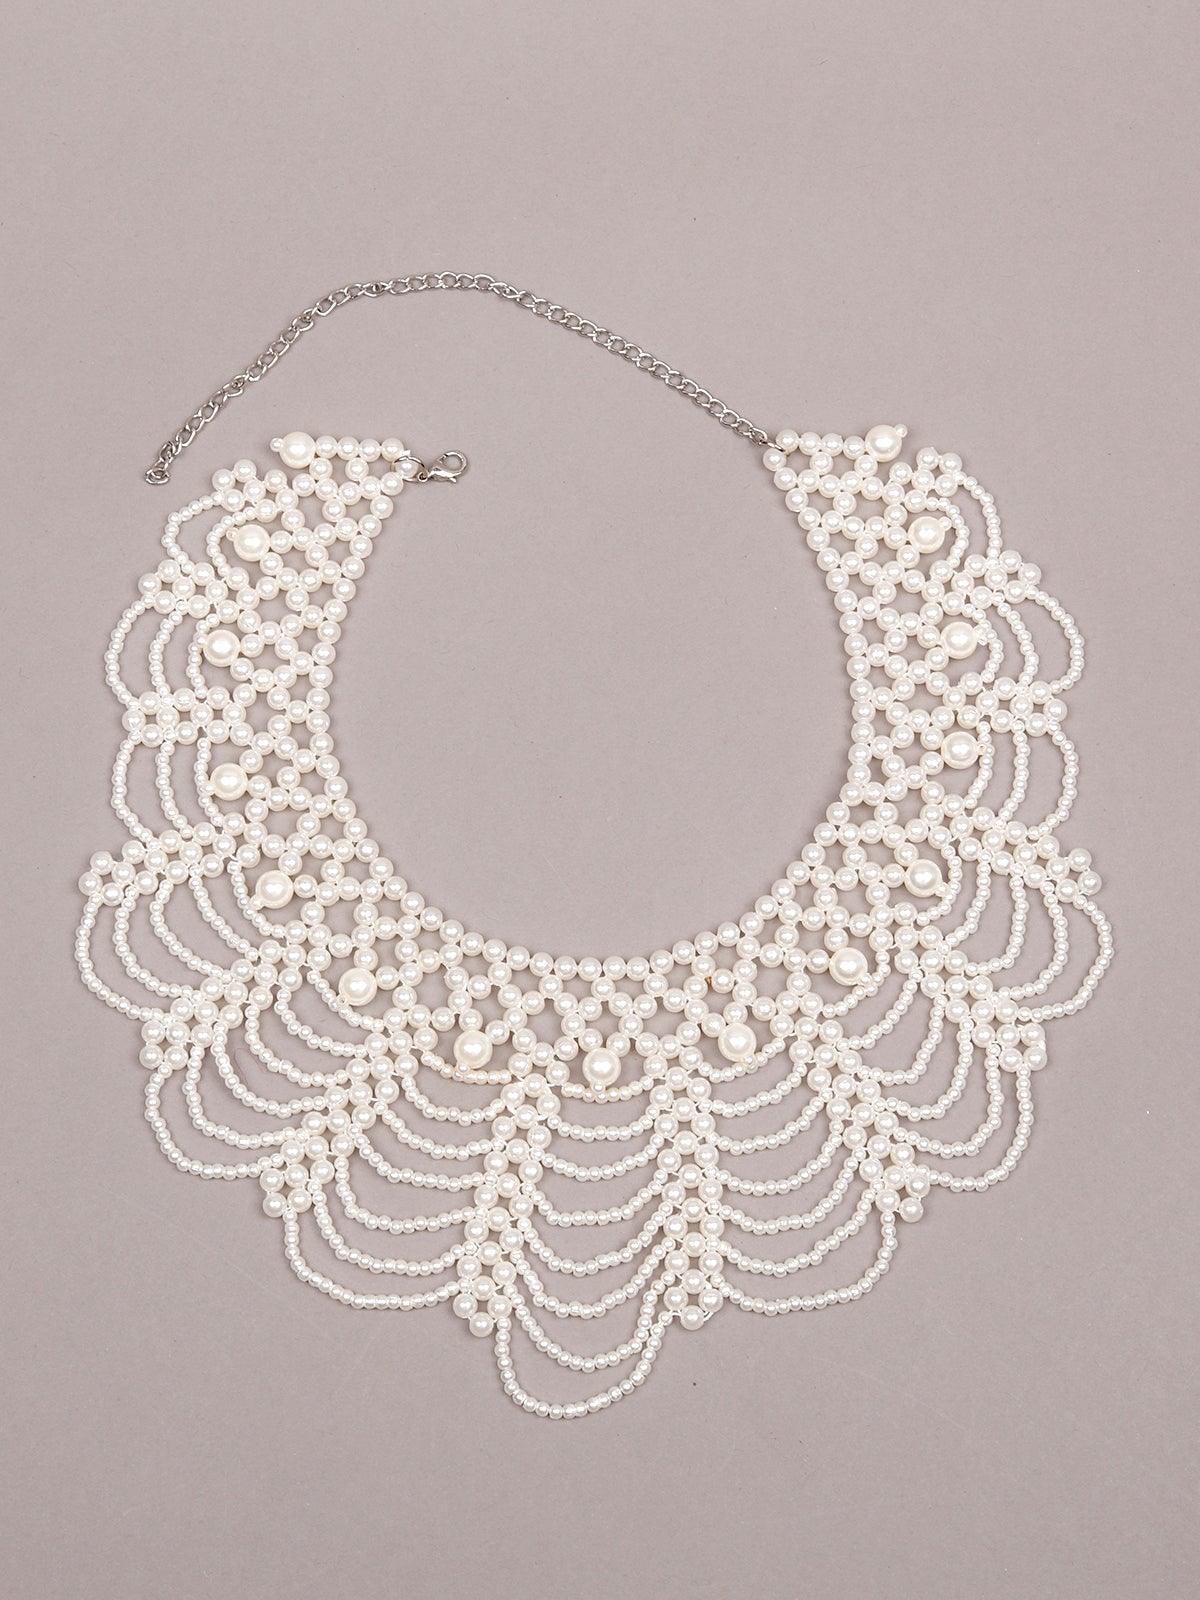 Women's Gorgeous White Pearl Choker Necklace - Odette